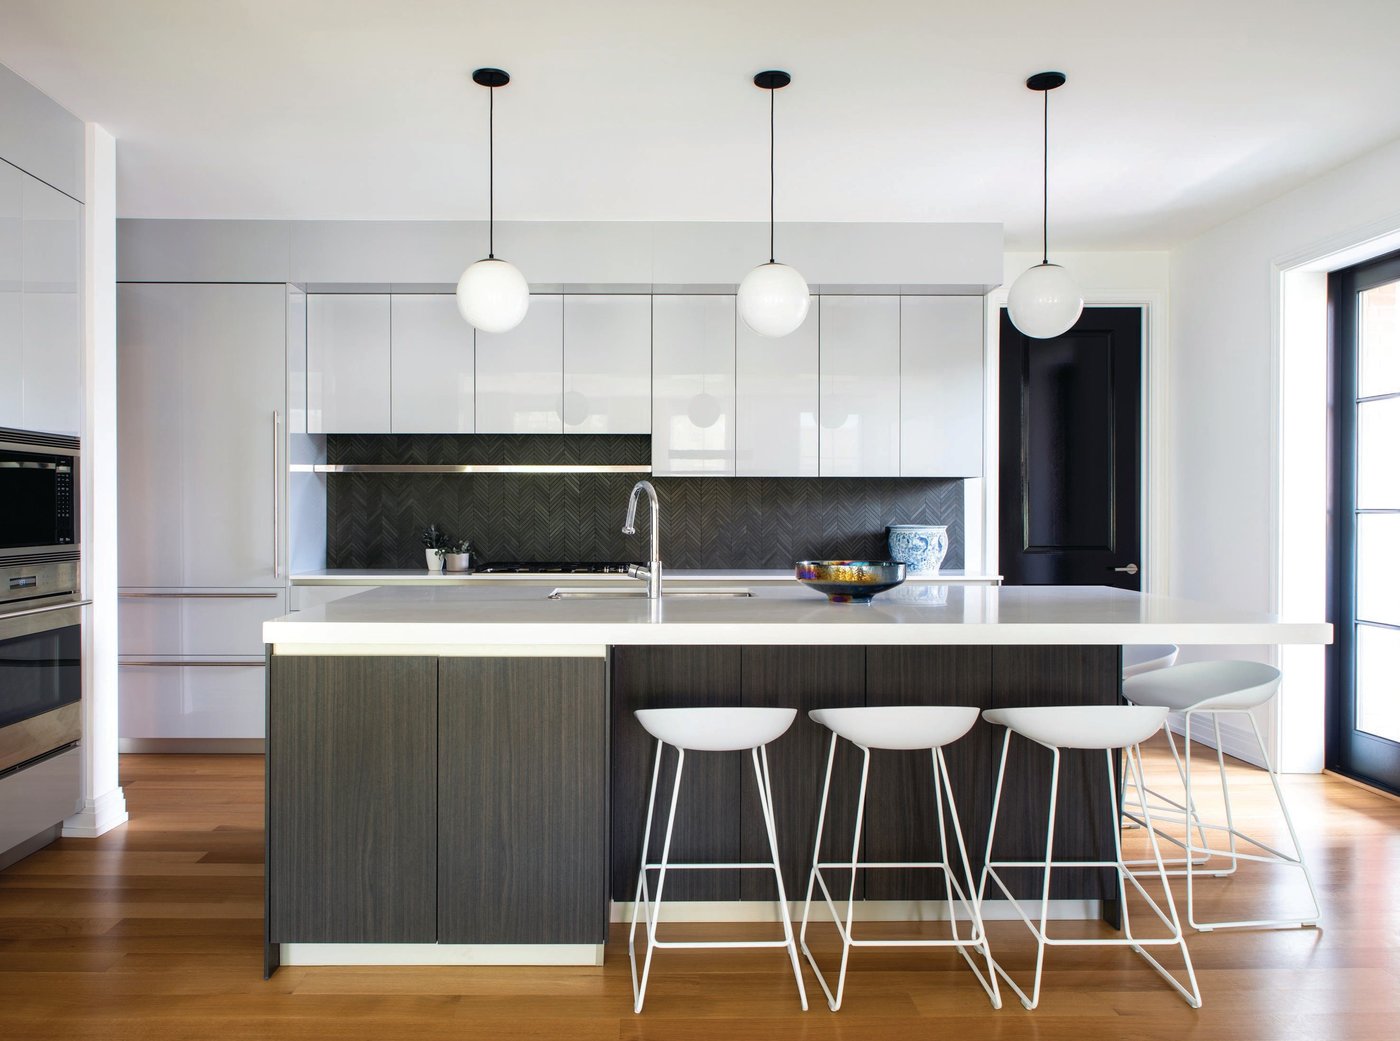 With sleek Snaidero cabinetry, quartz countertops by Stone Source and stools by Haze, the kitchen is a showstopper. PHOTOGRAPHED BY ANDREW MILLER